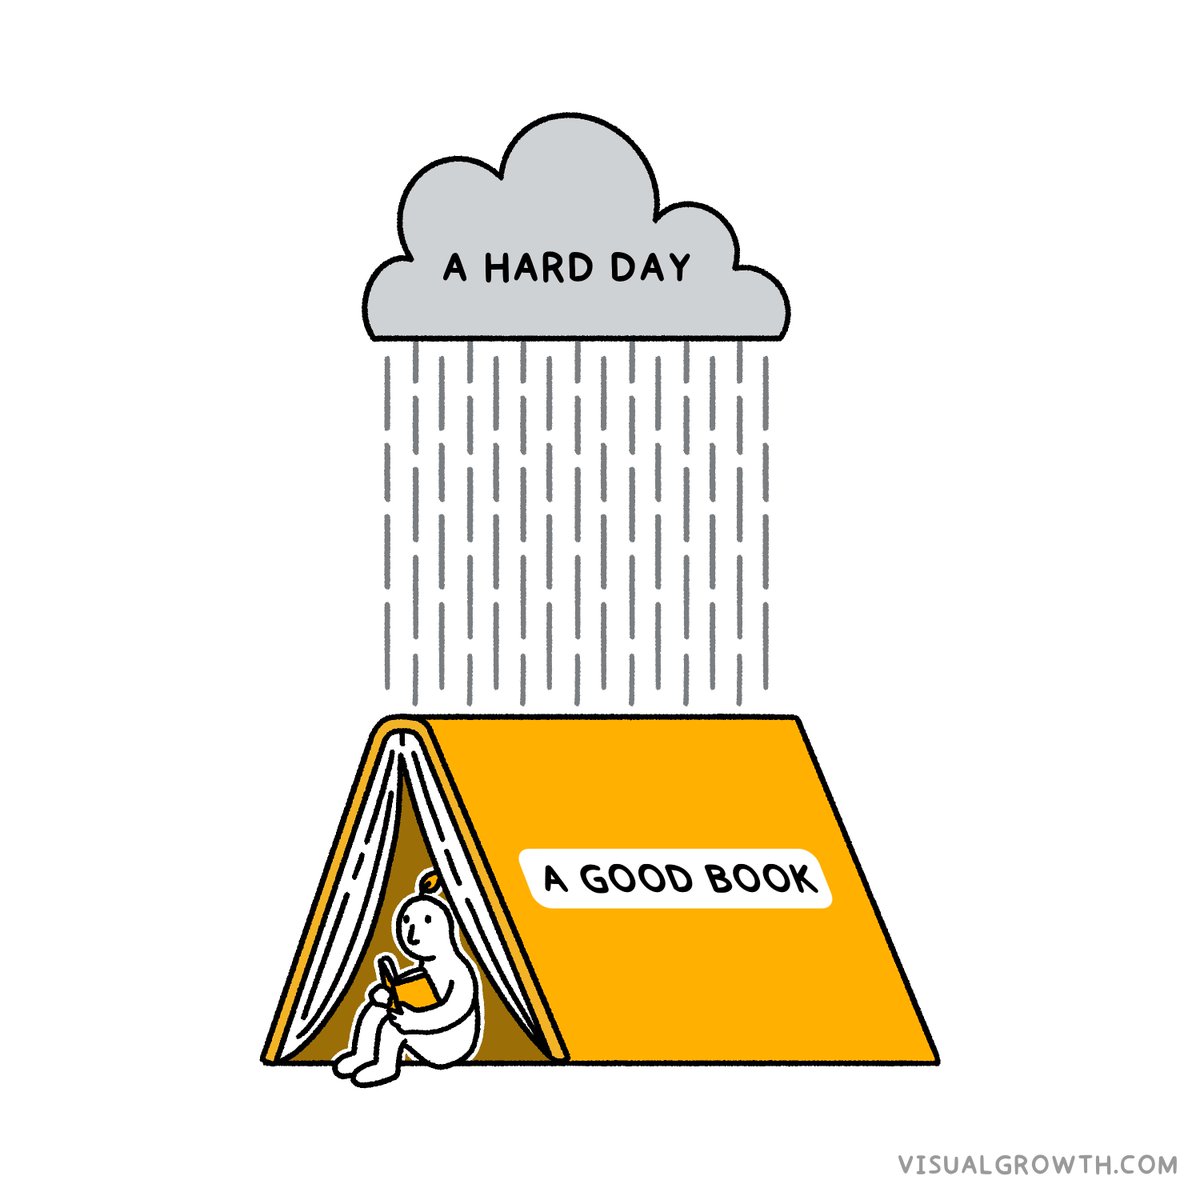 If you're having a hard day, find peace in a good book. (visual by @ash_lmb)